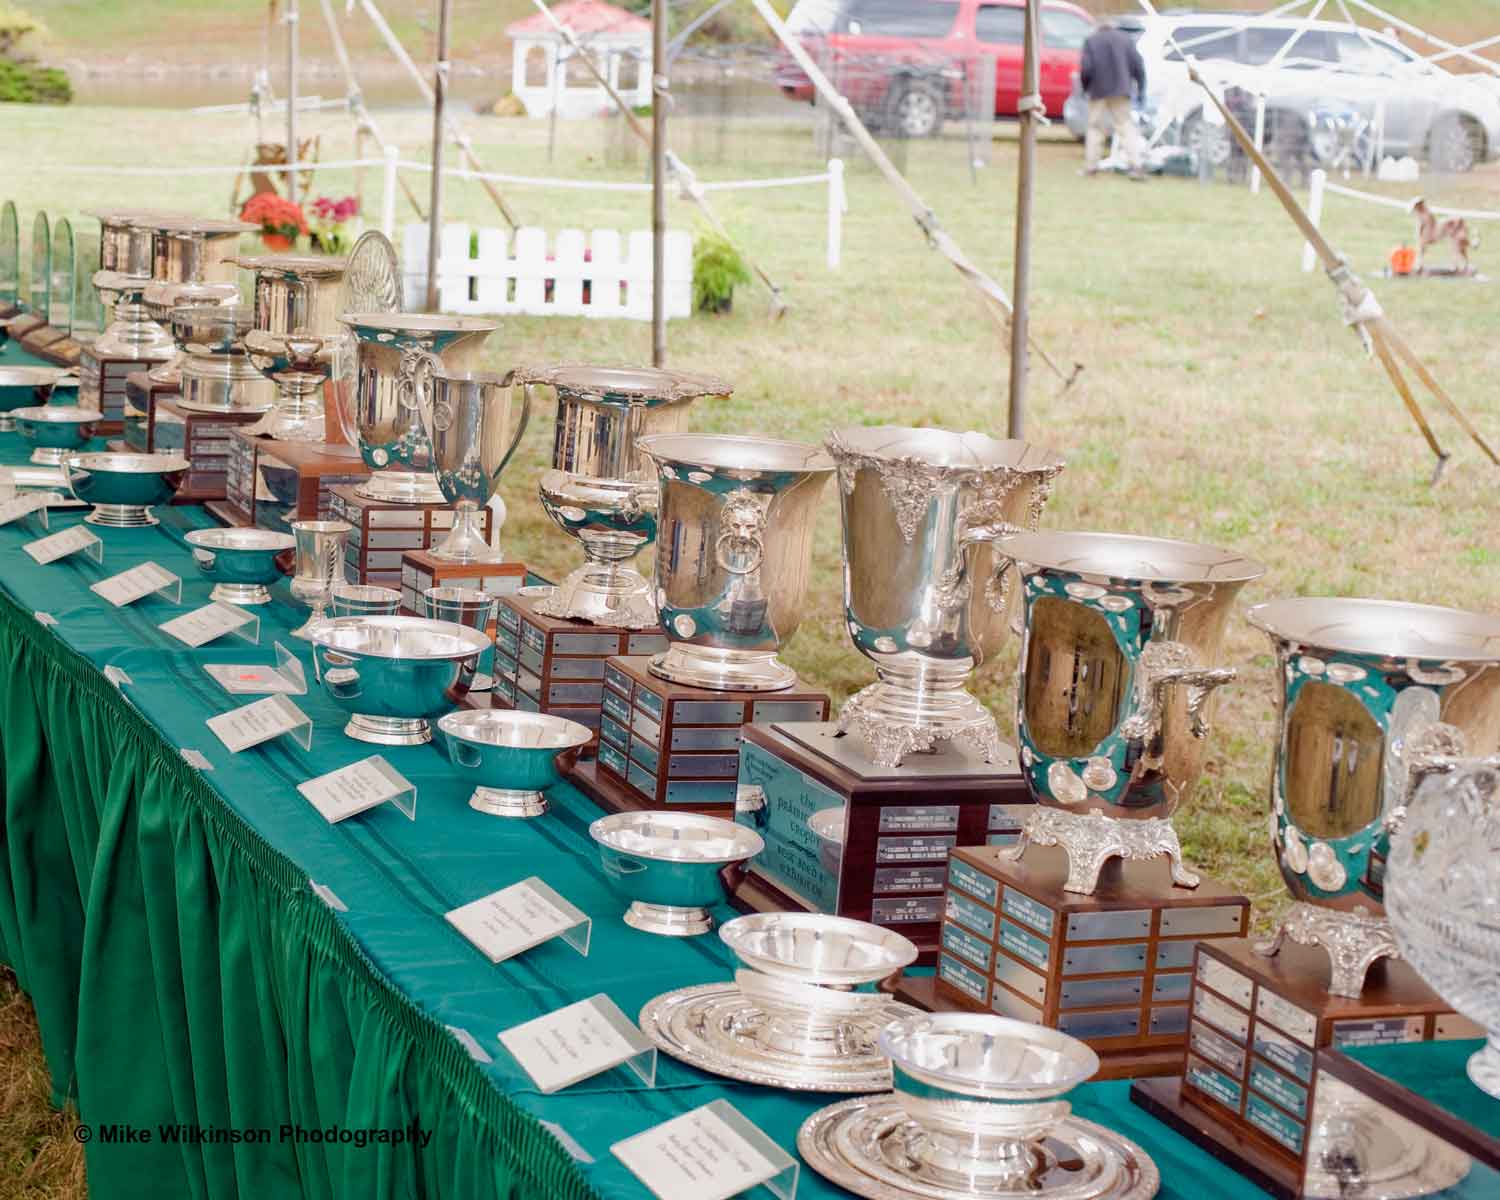 2017 TROPHY TABLE